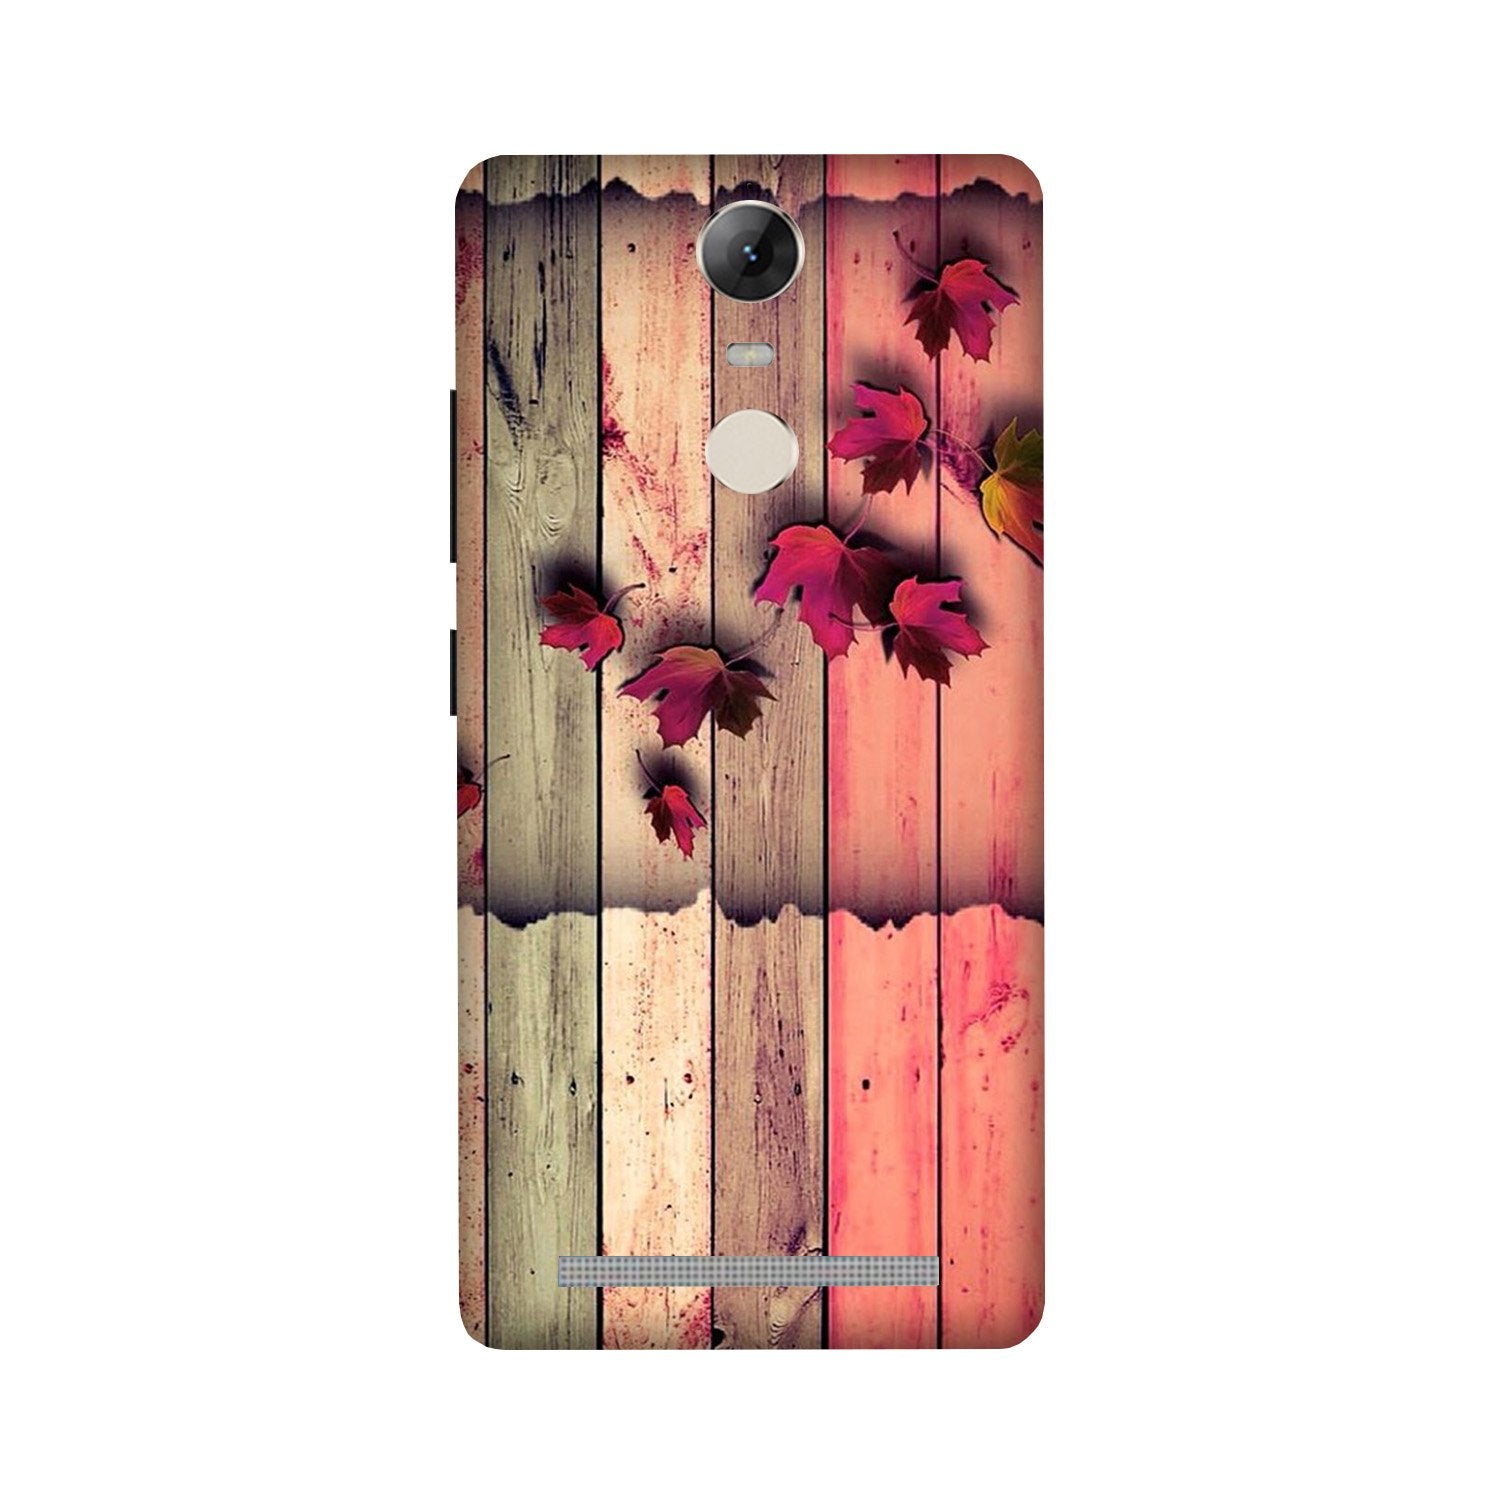 Wooden look2 Case for Lenovo Vibe K5 Note